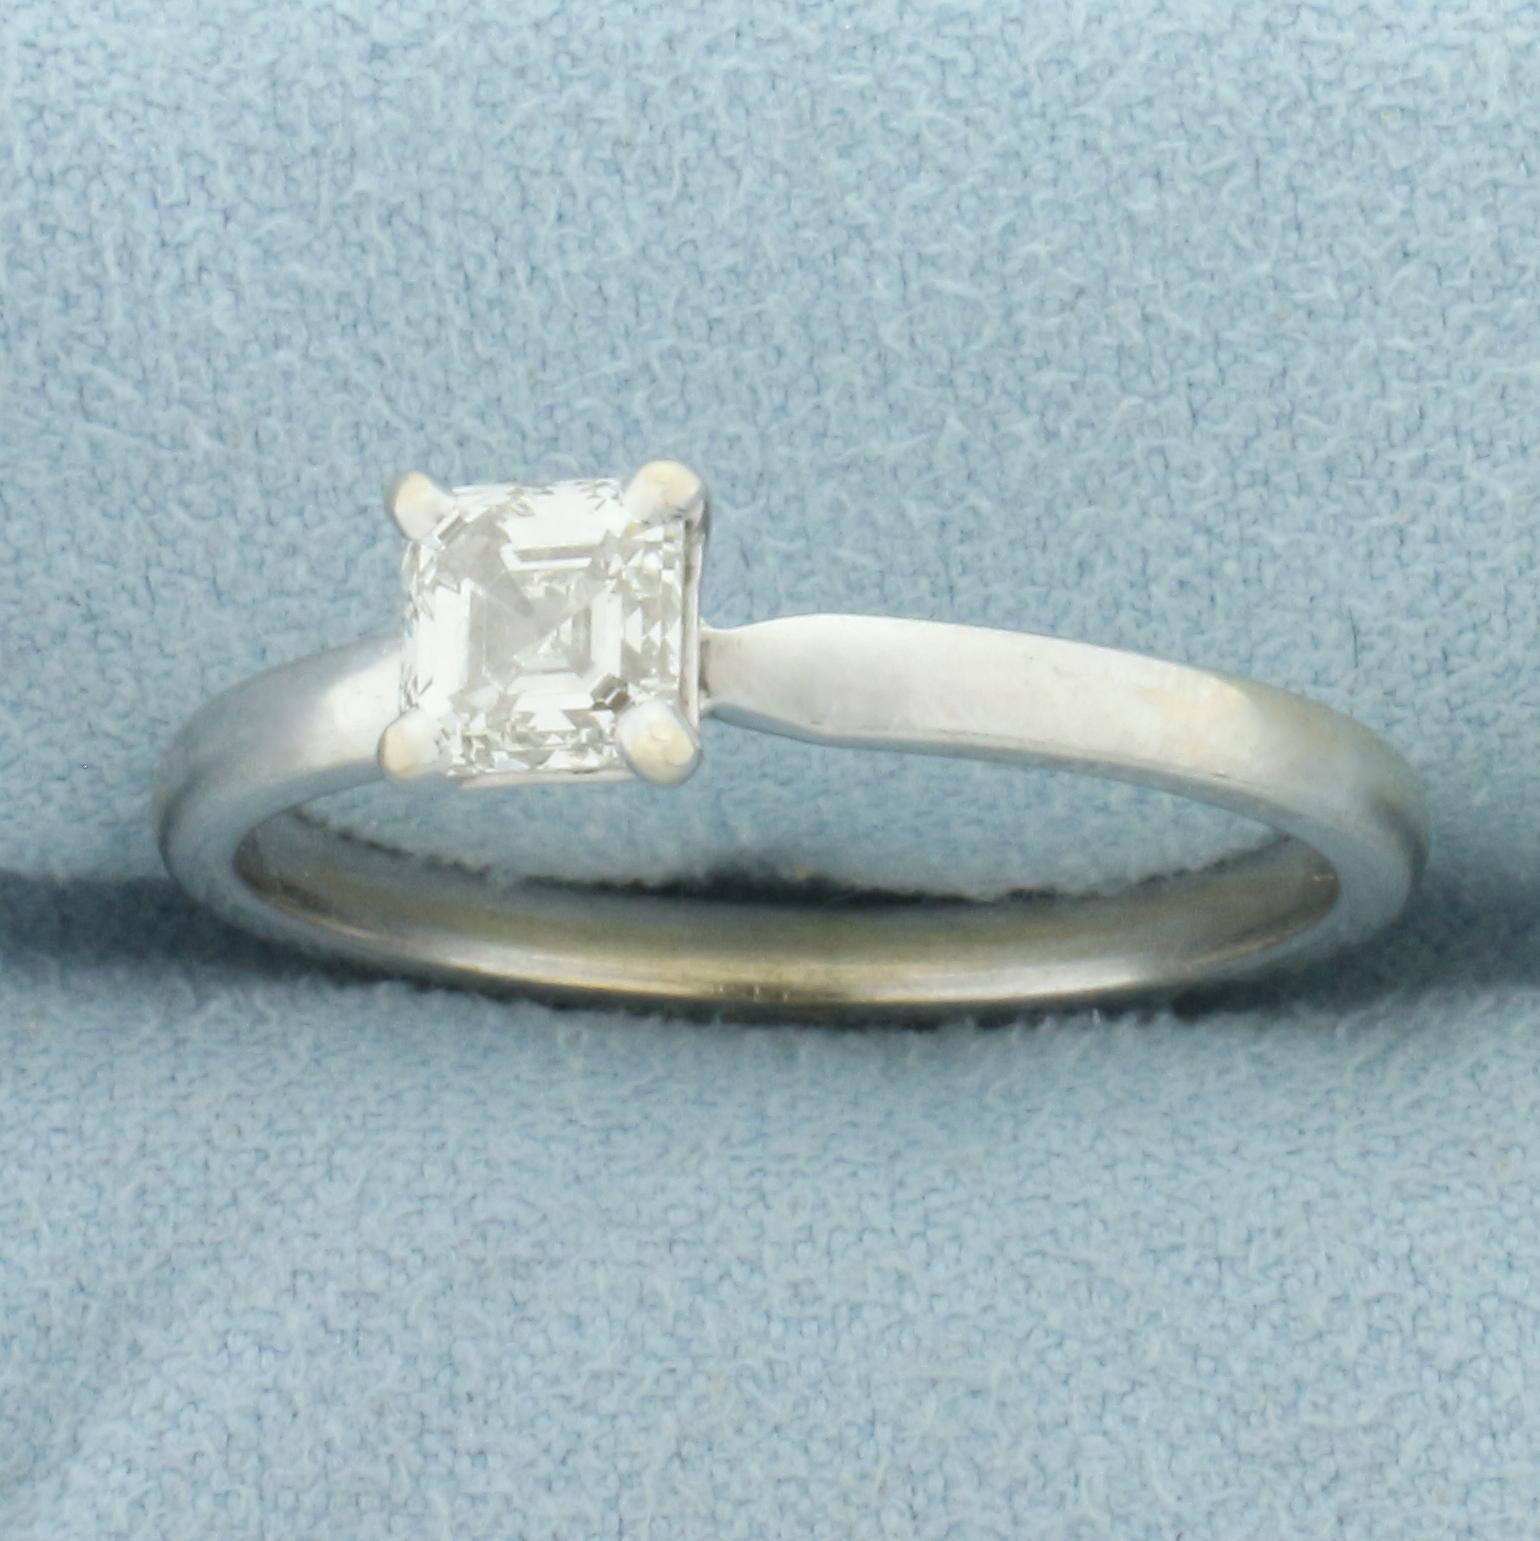 3/4ct Asscher Cut Solitaire Engagement Ring In 14k White Gold